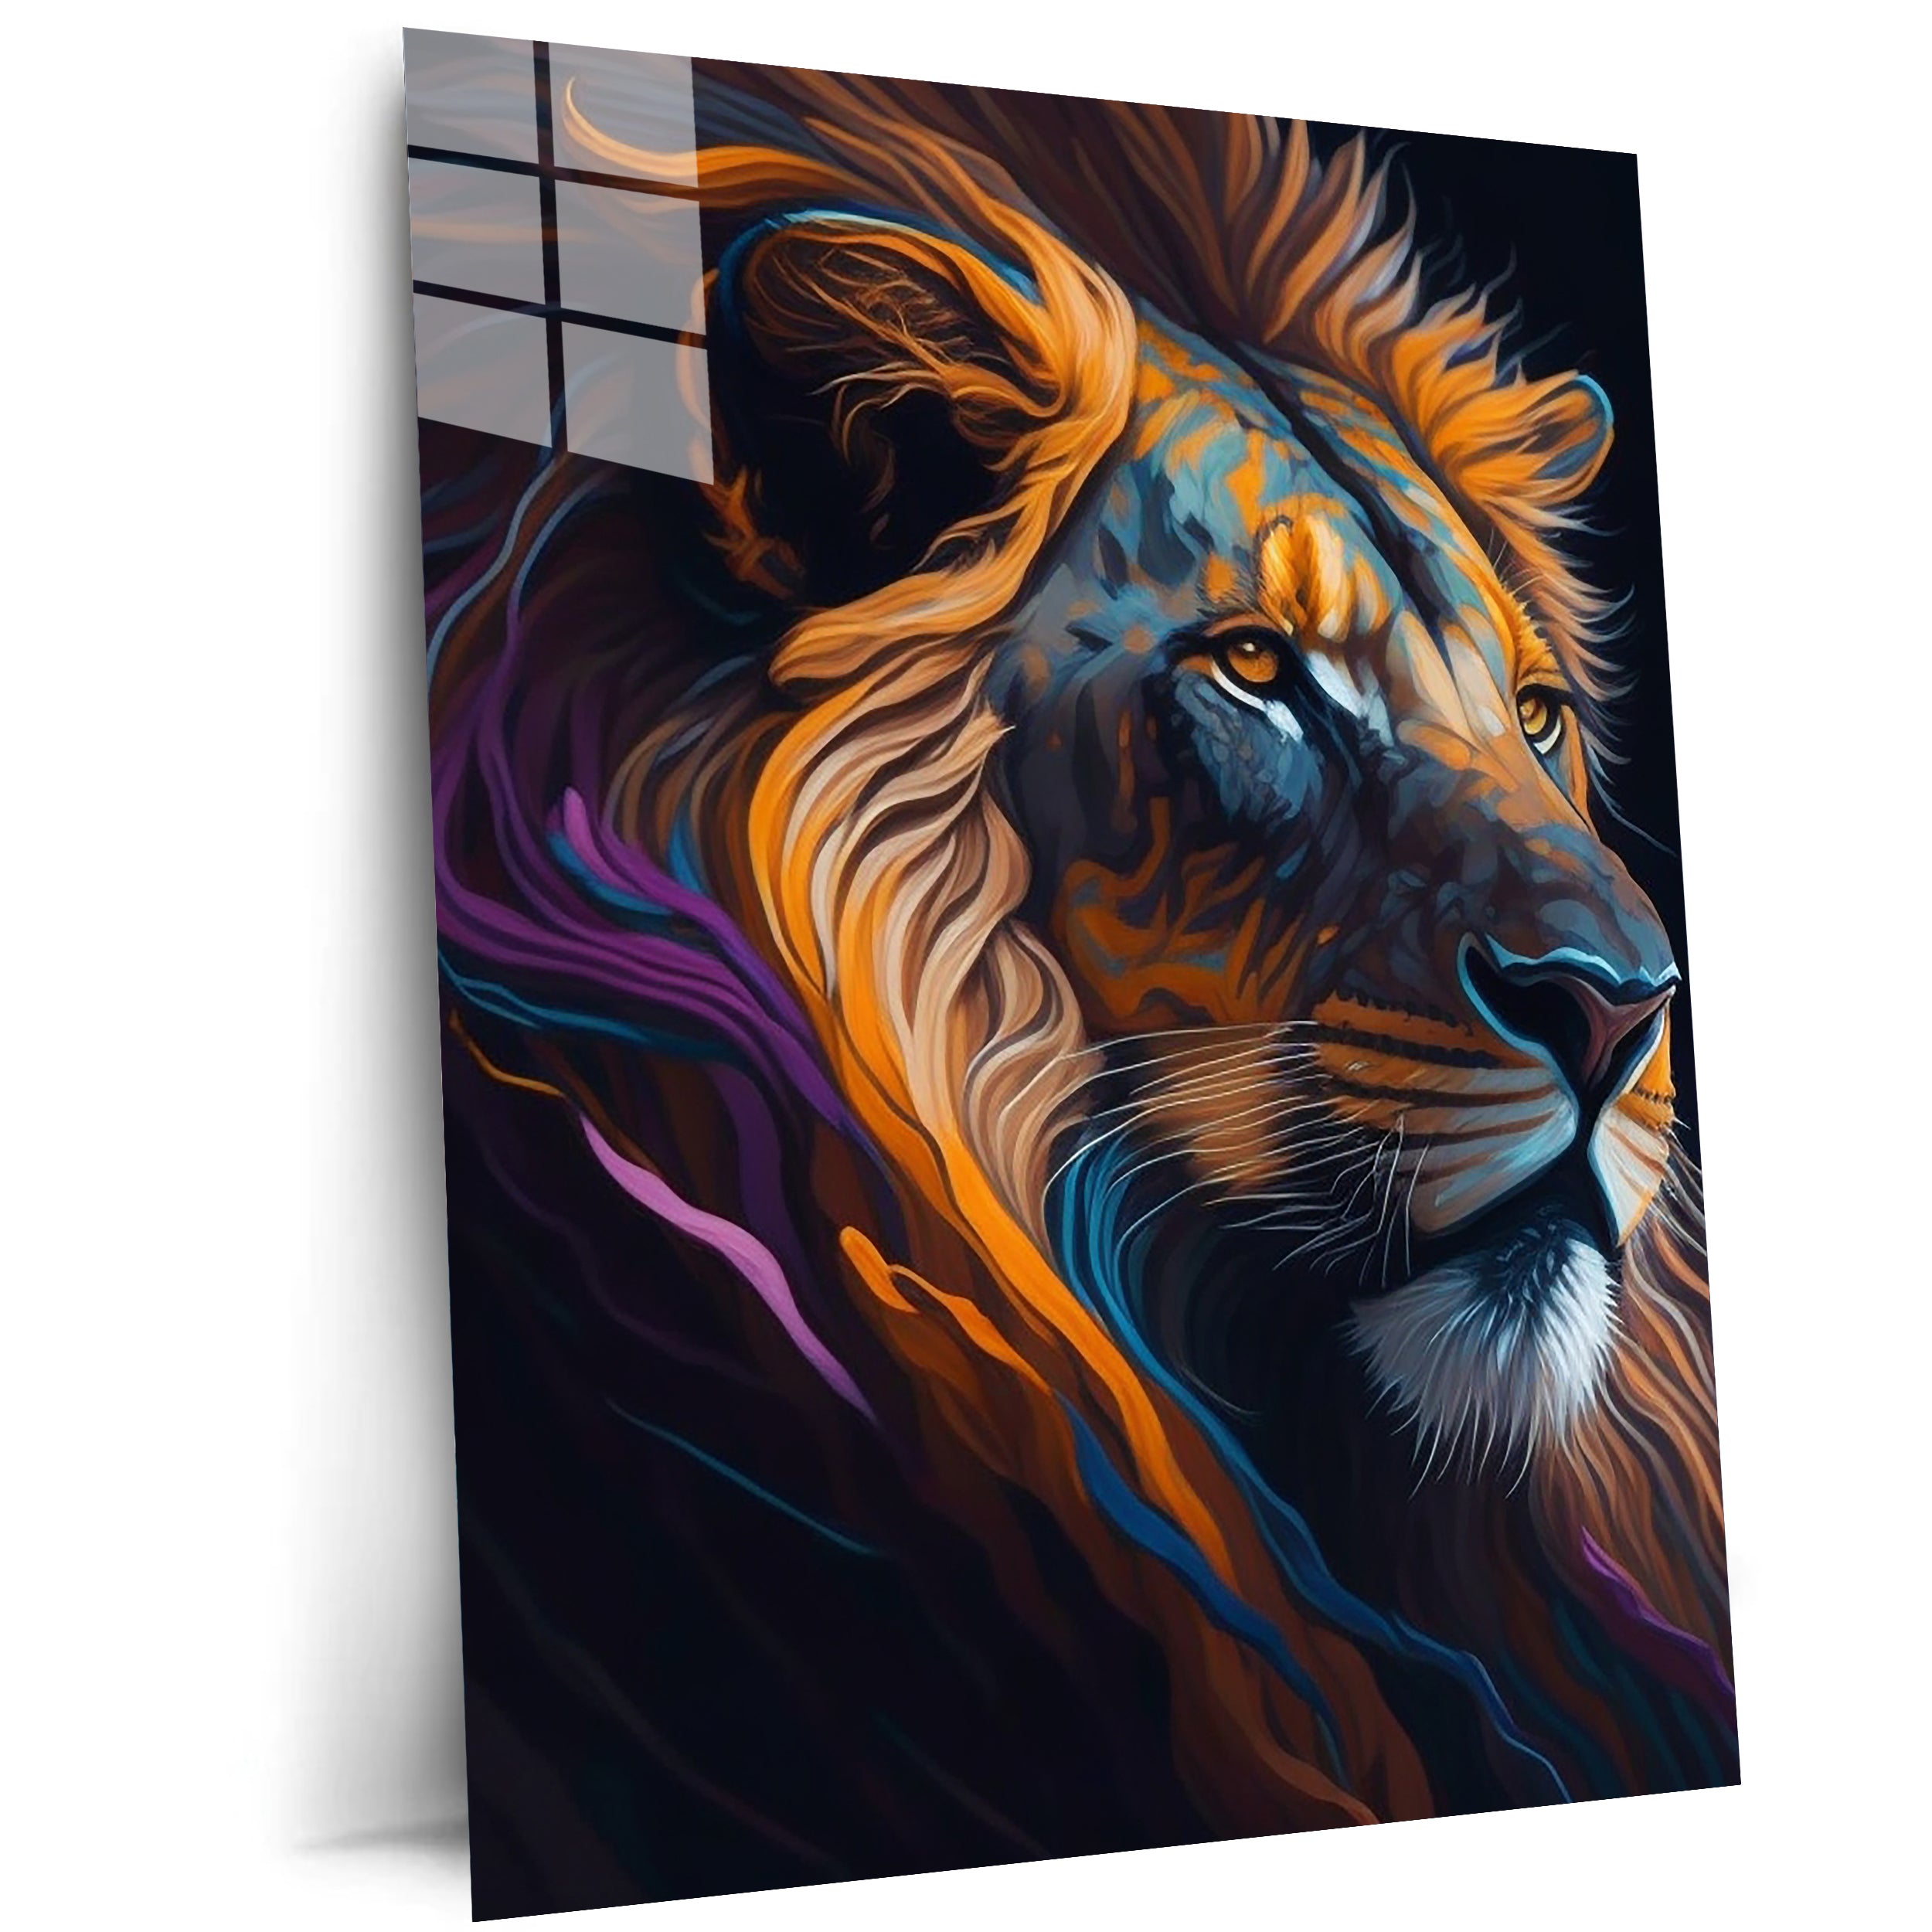 Painted Lion-Artwork by @AungKhantNaing